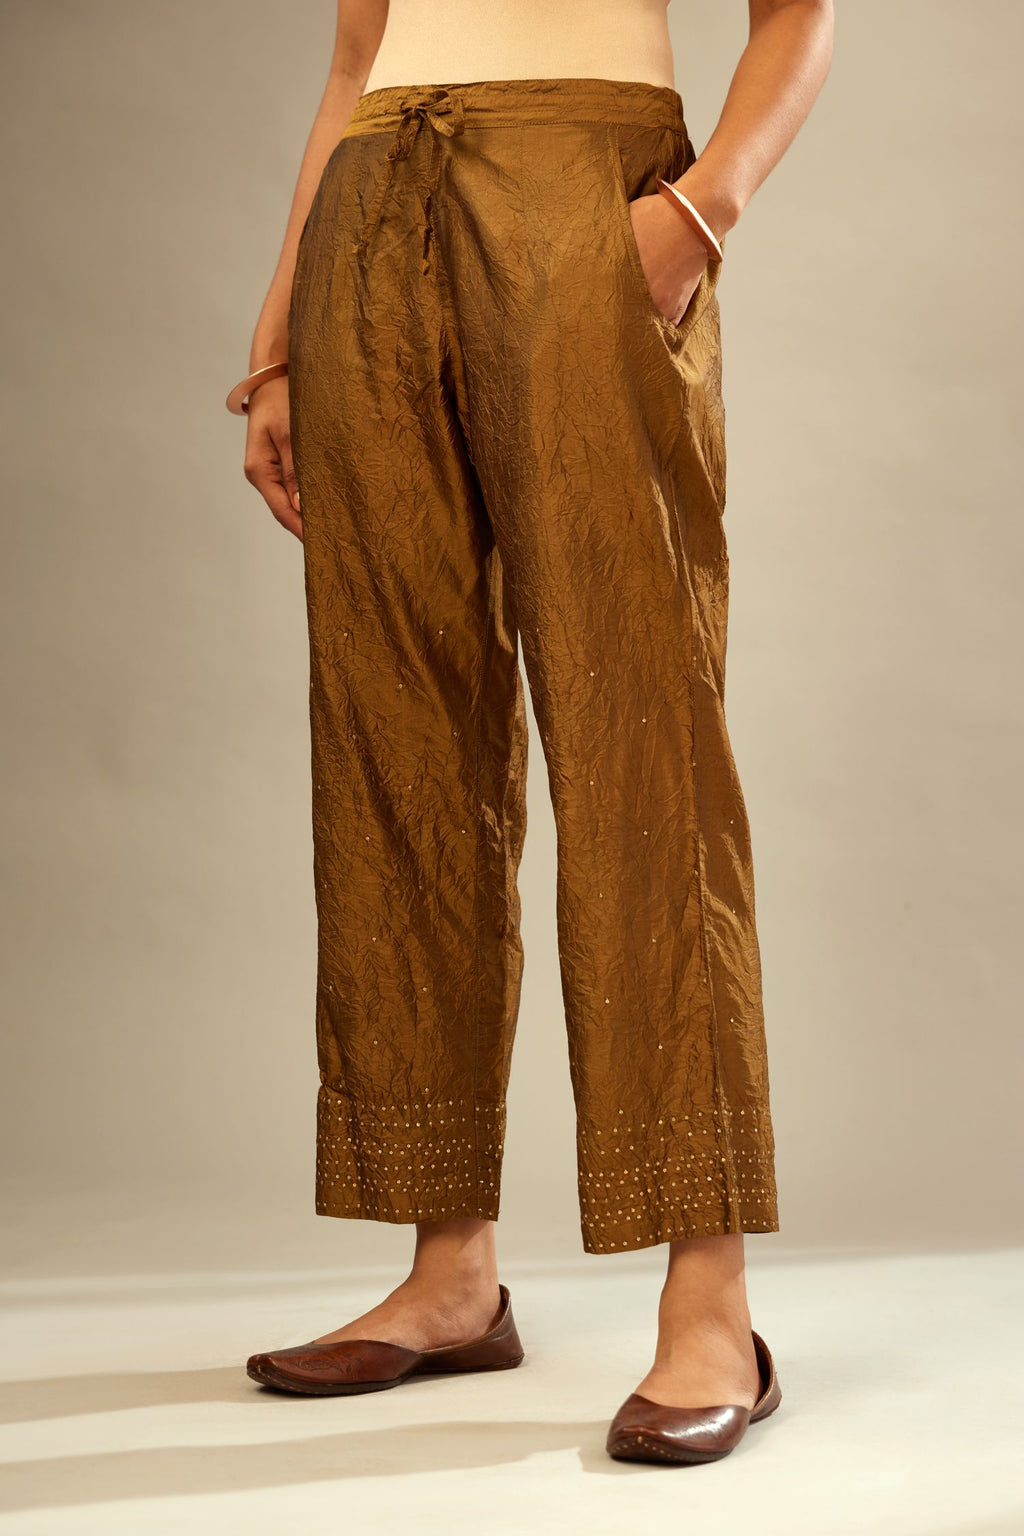 Golden olive hand crushed pure silk straight pants with gold sequins at hem in horizontal lines formation and side pockets.